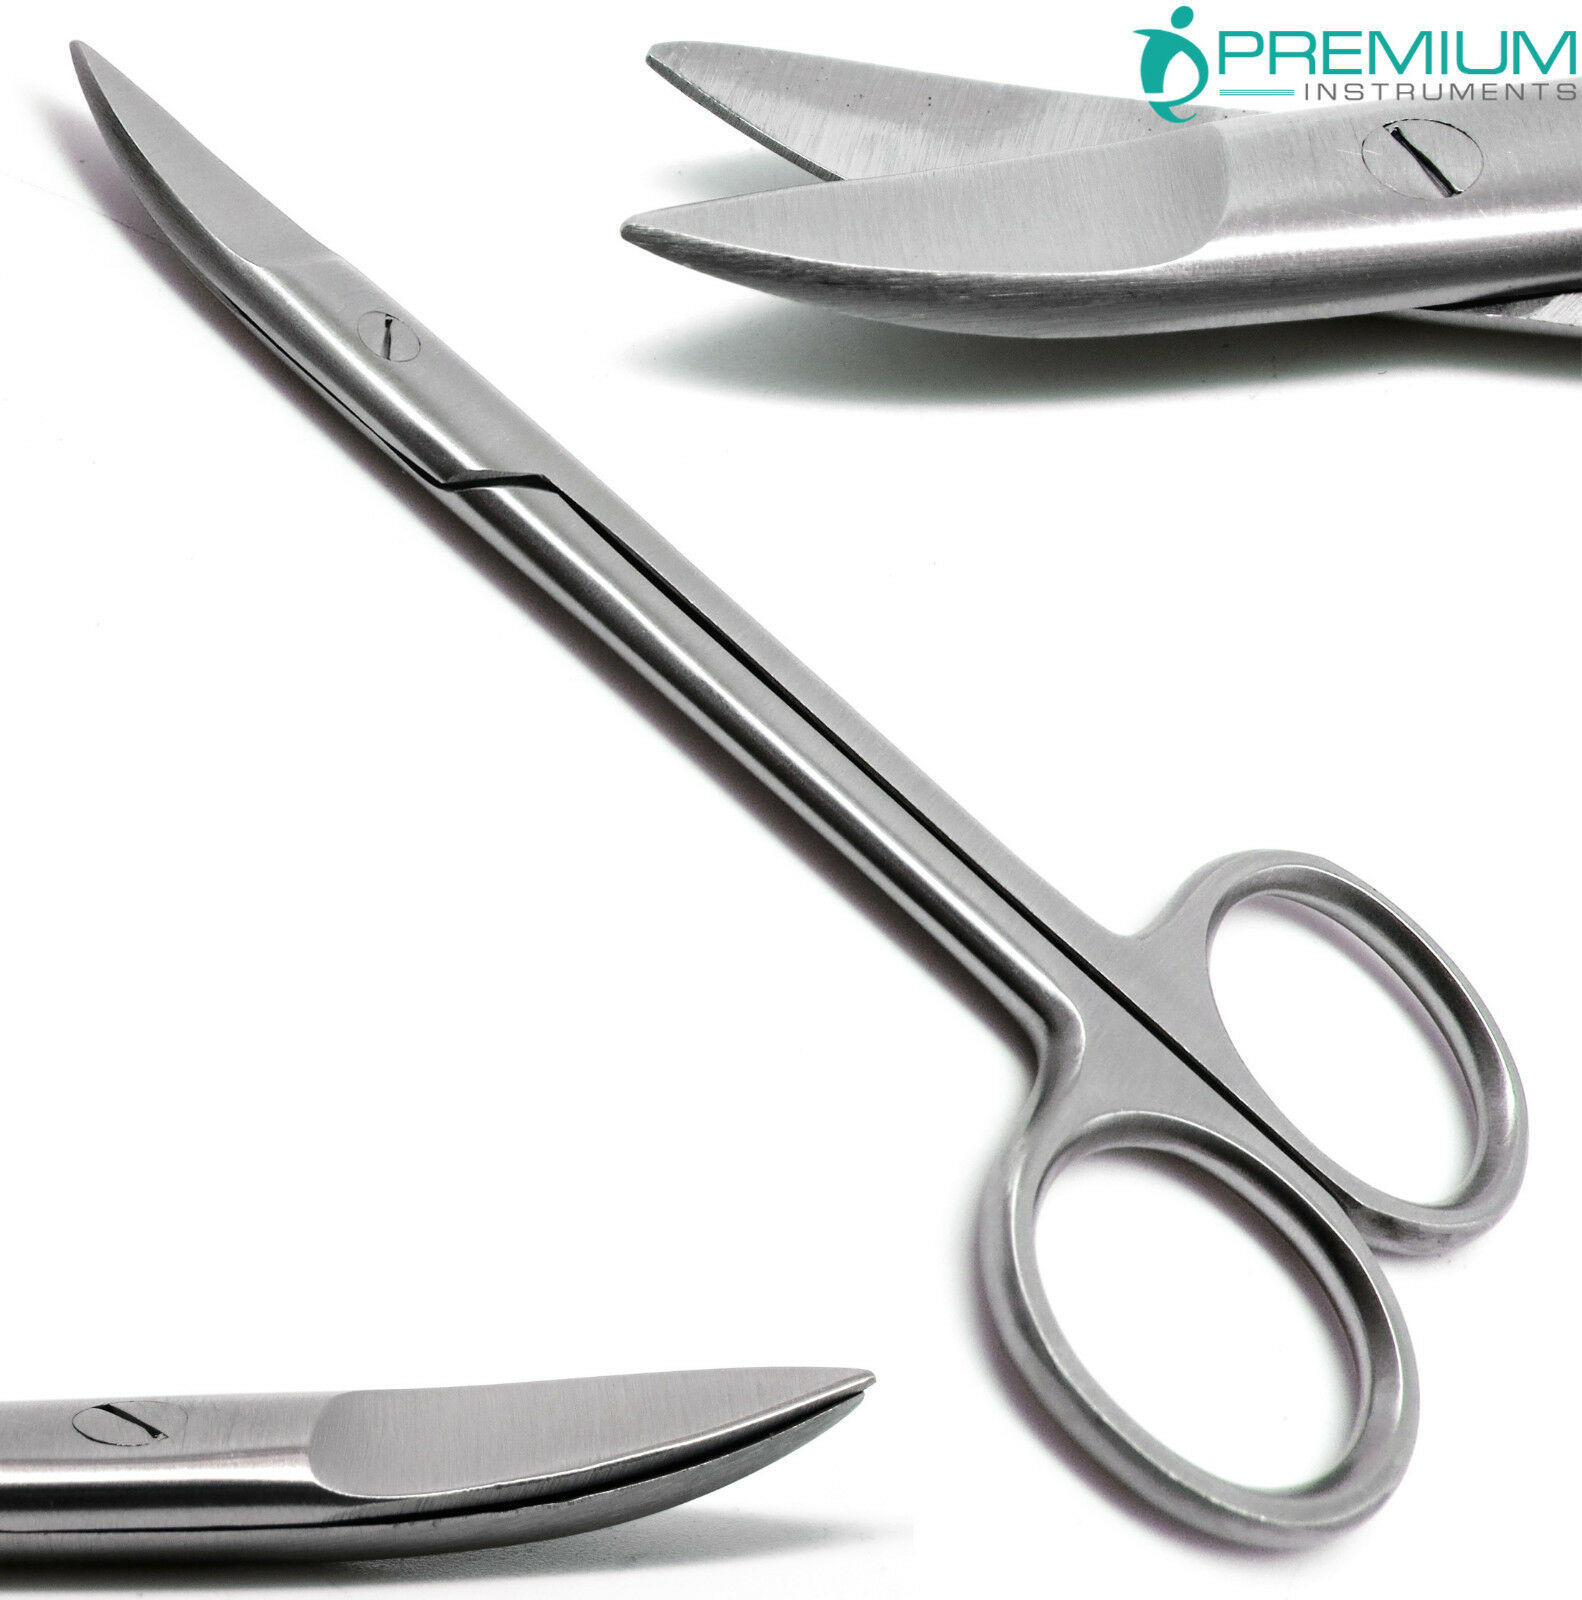 Dental Curved Crown Scissors 4.5" Wire Cutting Orthodontics Steel Instruments